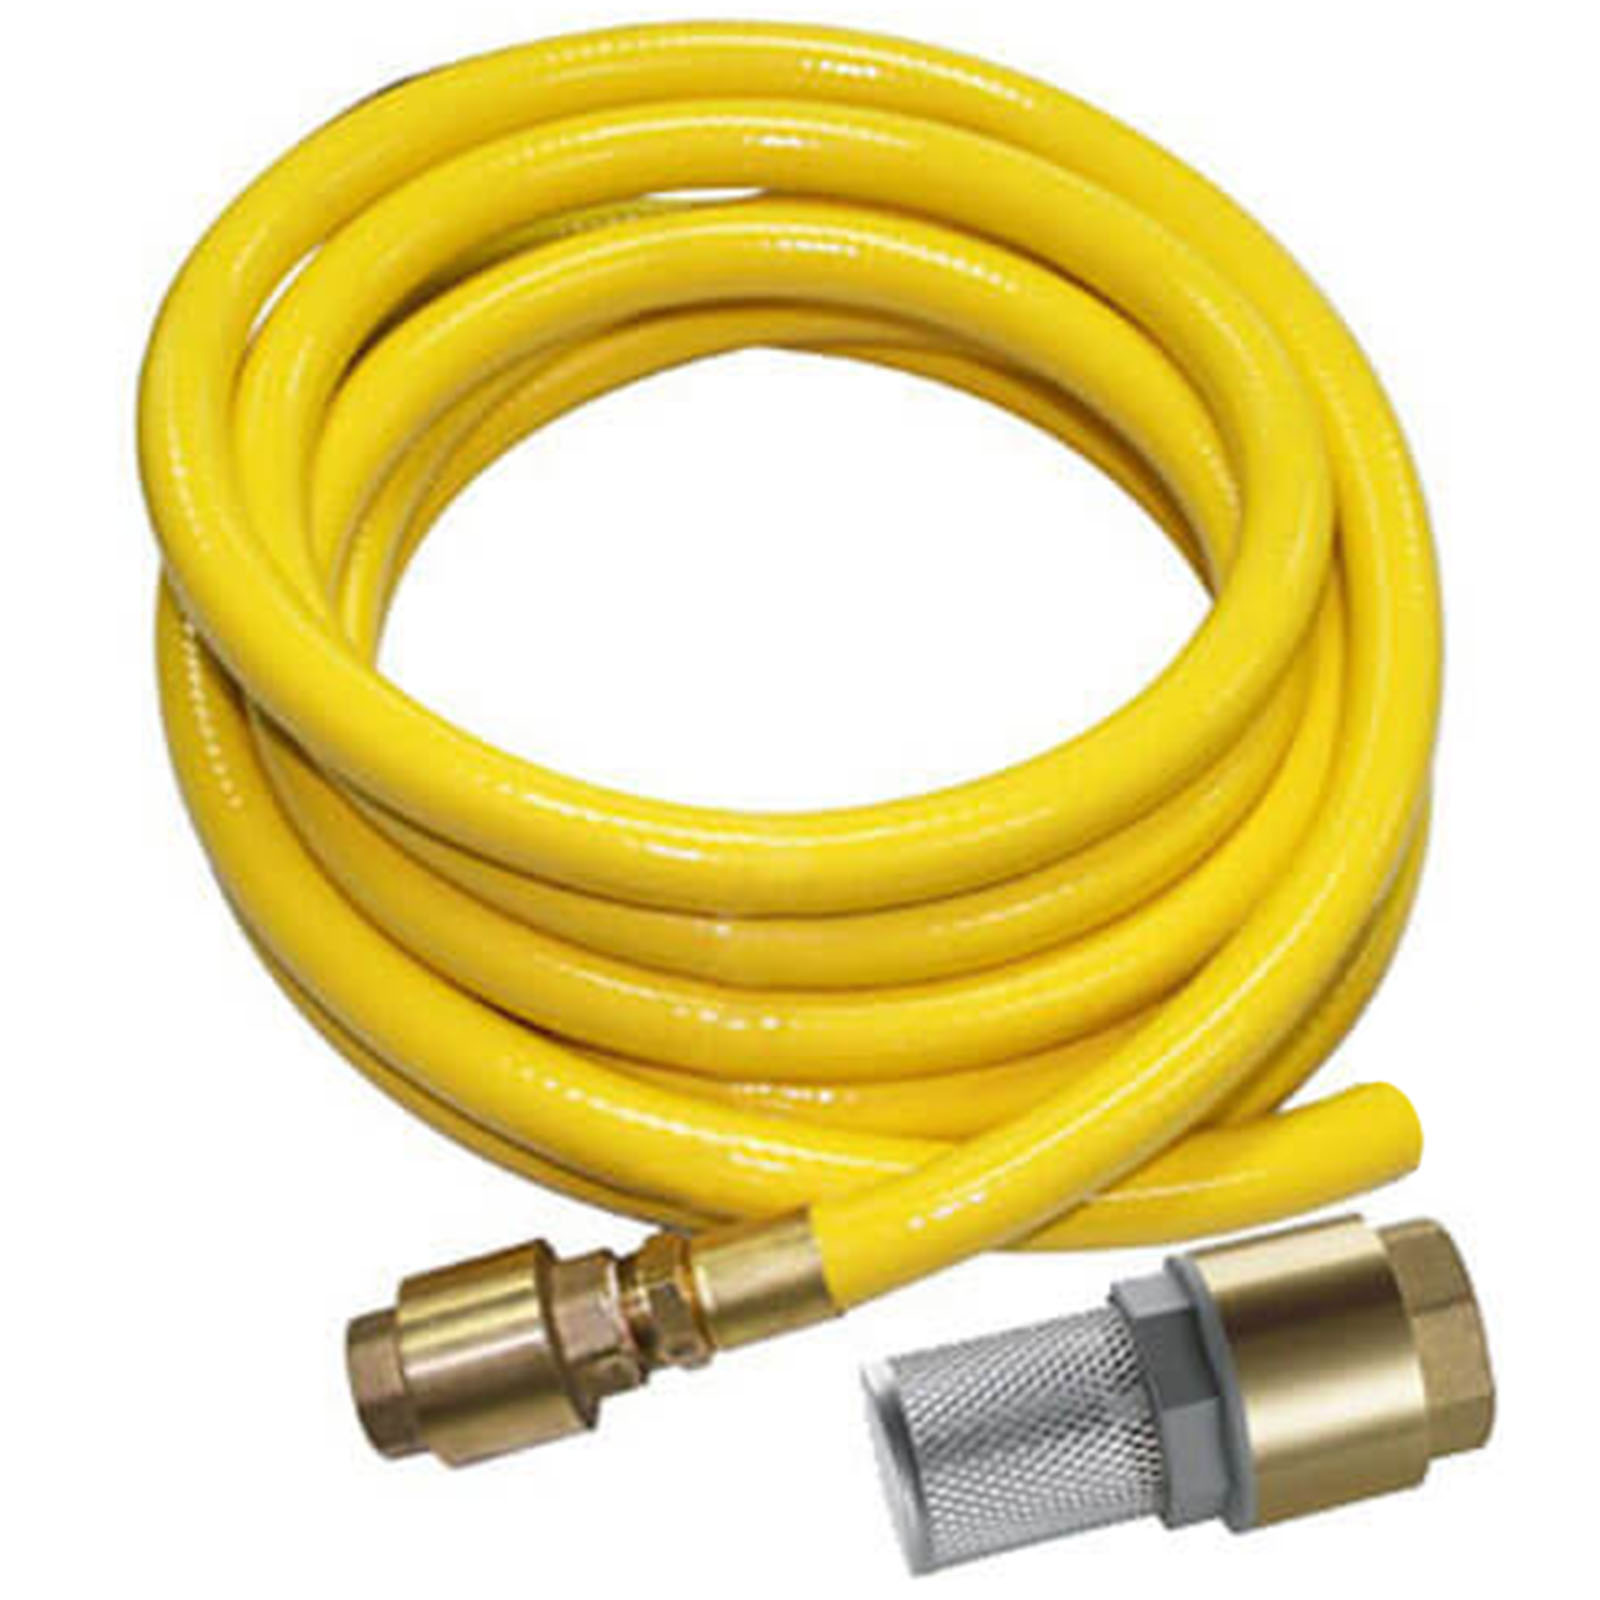 Karcher Suction Hose and Filter for HD and XPERT Pressure Washers 3m